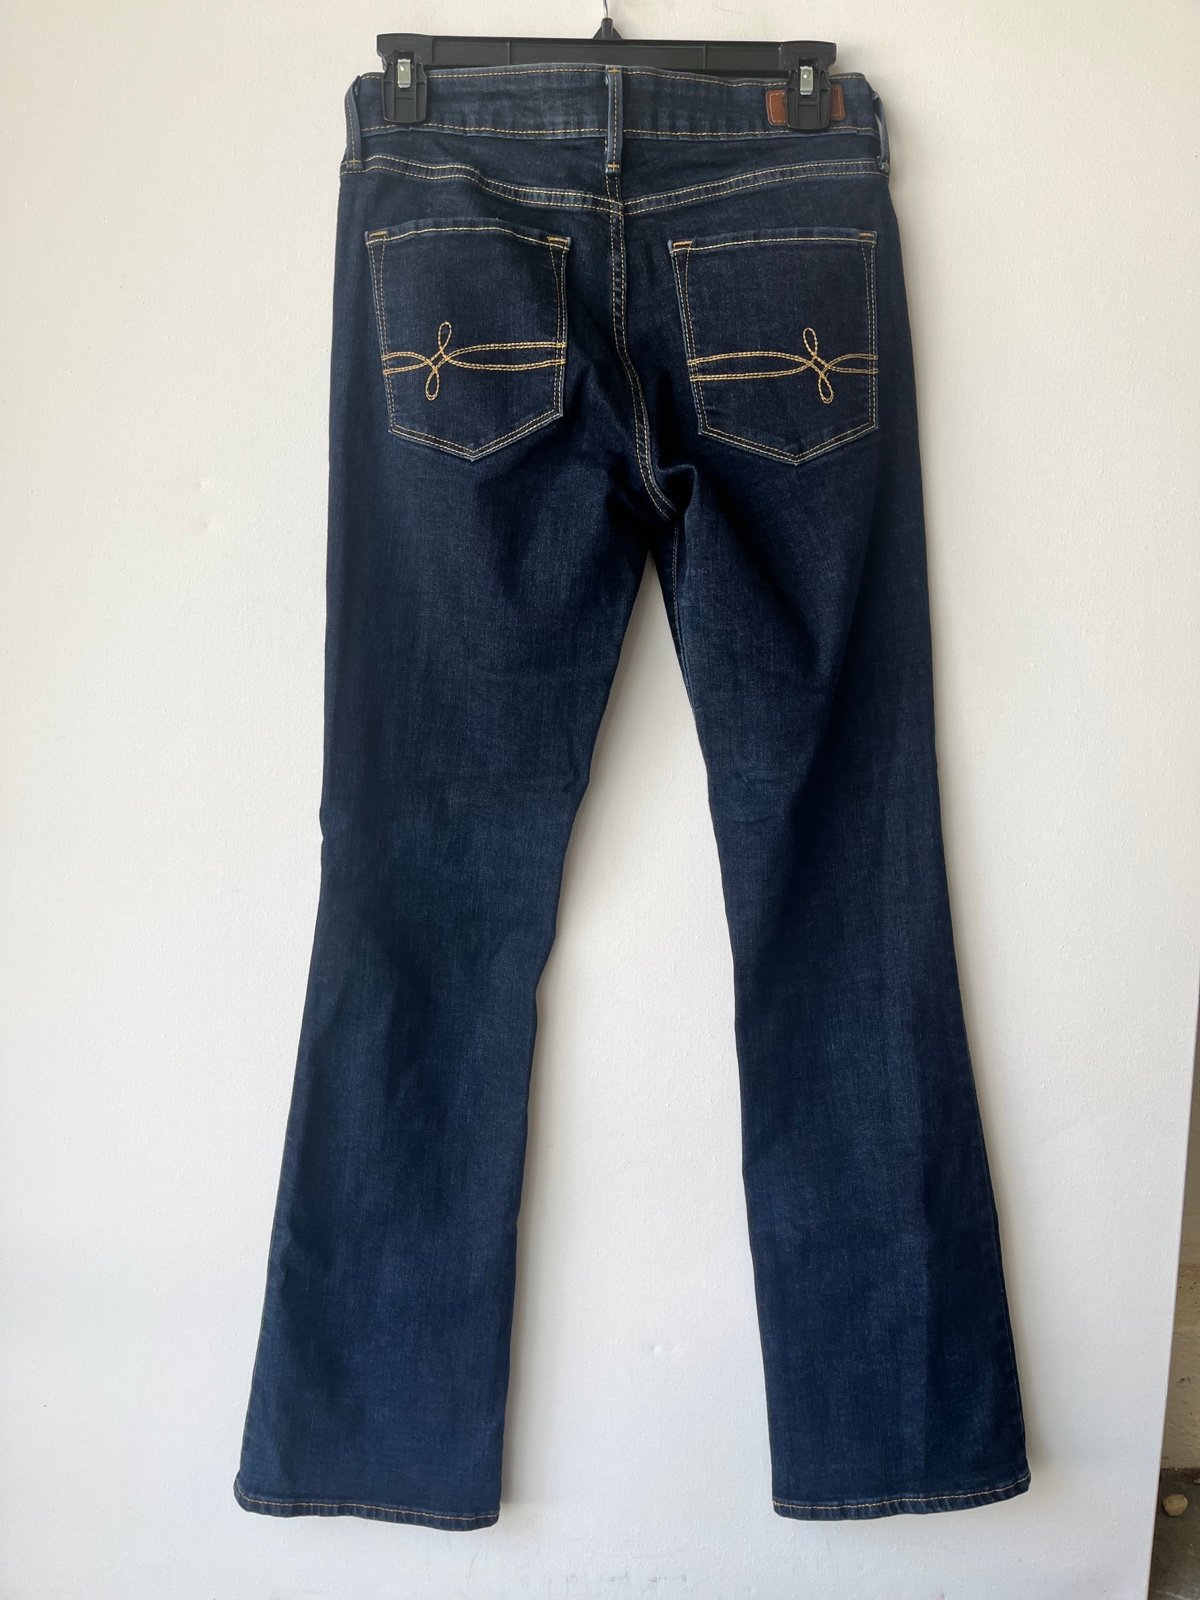 Buy Jeans NweqioS7I Store Online